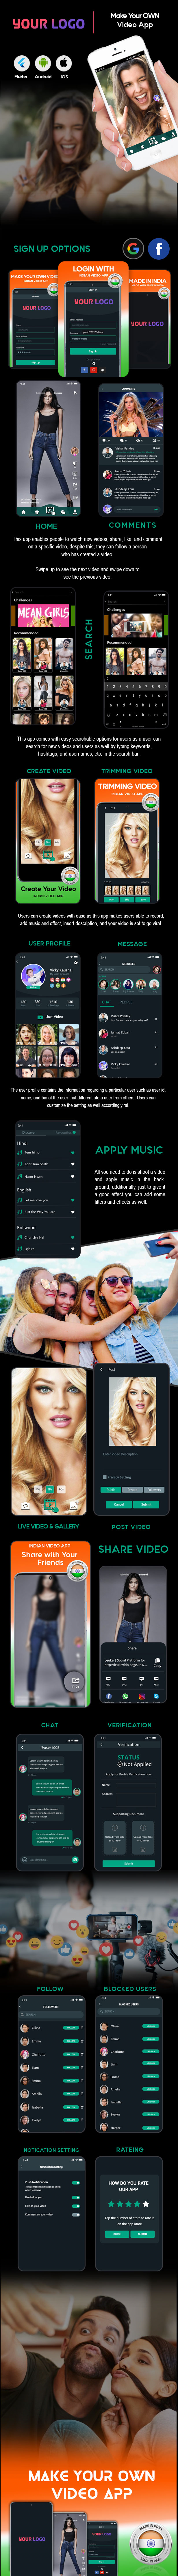 Flutter - TikTok Clone | Triller Clone & Short Video Streaming Mobile App for Android & iOS - 4